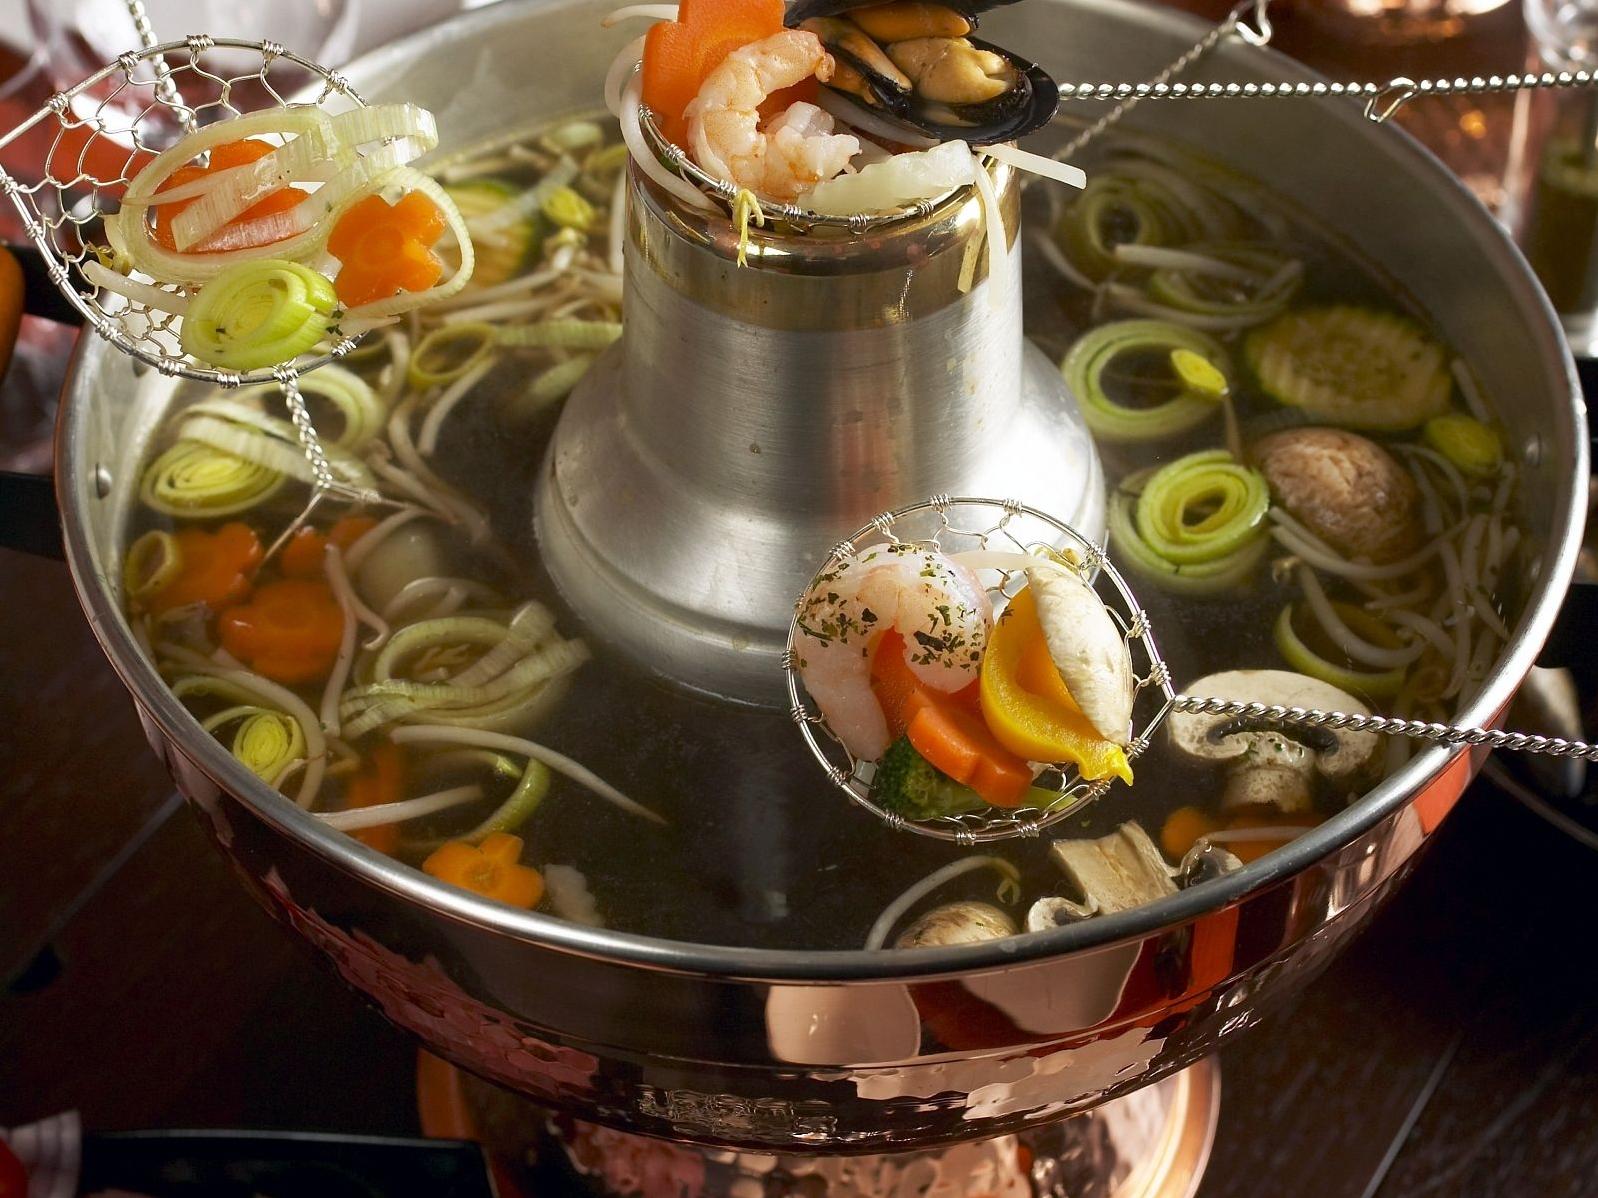  Customize your own hotpot by selecting your favorite ingredients and dipping sauces.